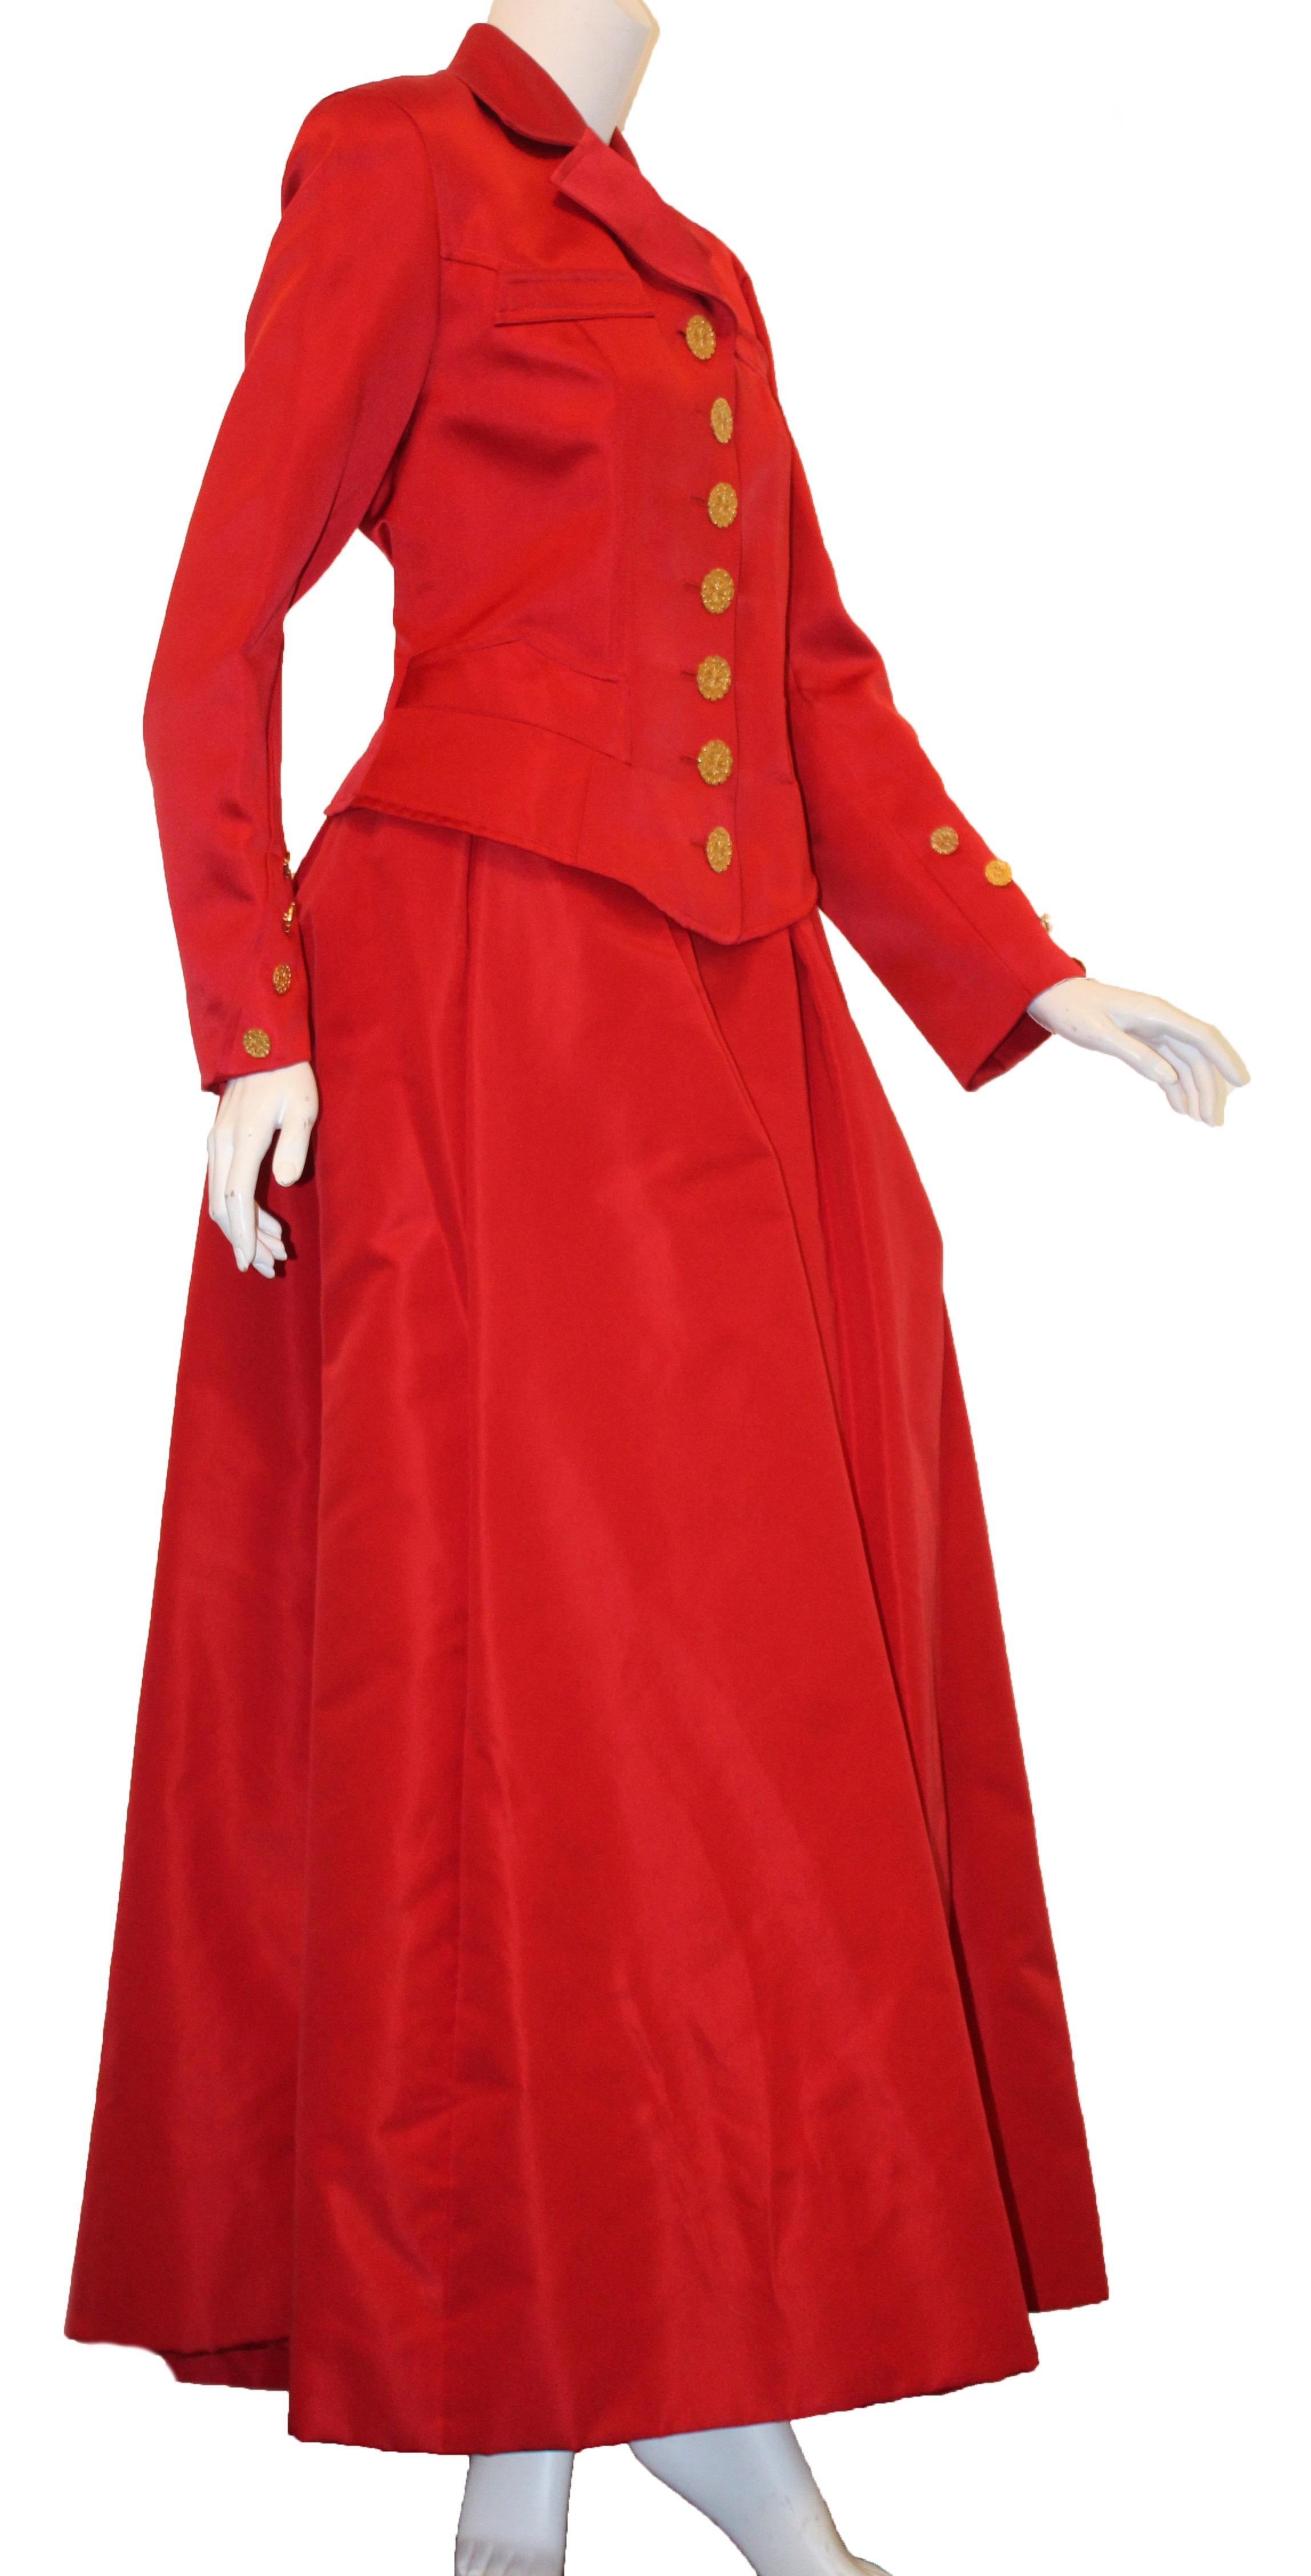 Christian Lacroix red silk outrageously dramatic two piece, jacket and skirt, ensemble contains structured shoulder pads  sewn underneath the lining.  The jacket has a high notch collar with two faux pockets on the chest and two slit pockets at he